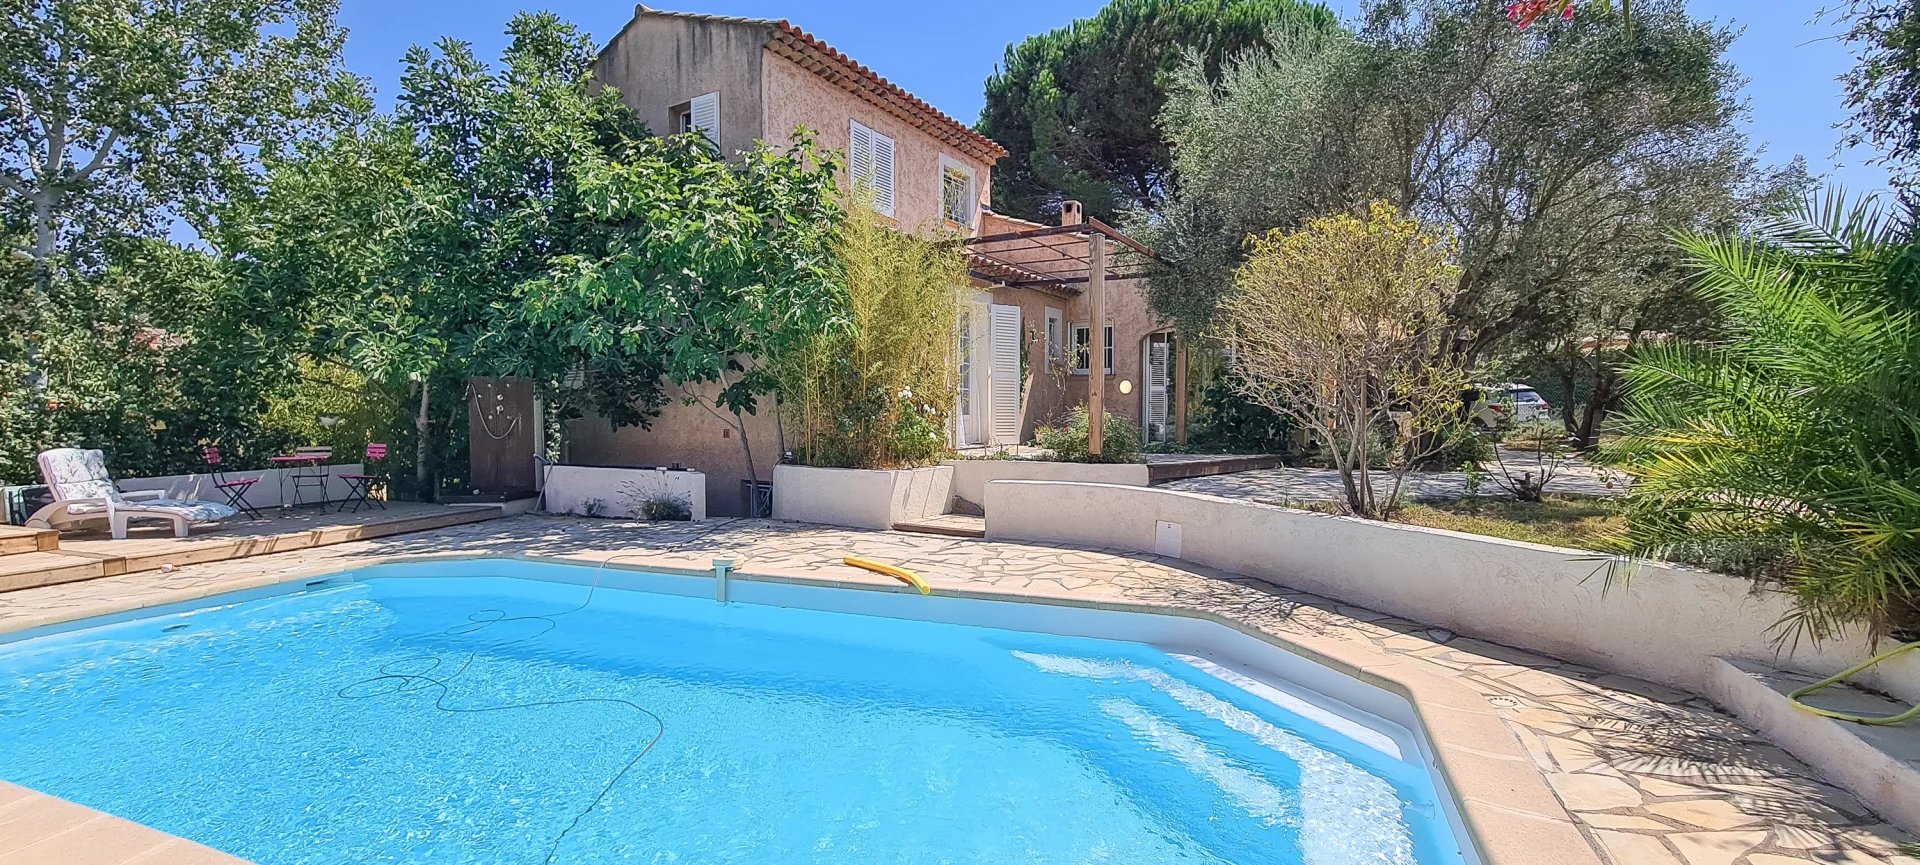 6 ROOMS VILLA with POOL AT FREJUS RESIDENTIAL AREA